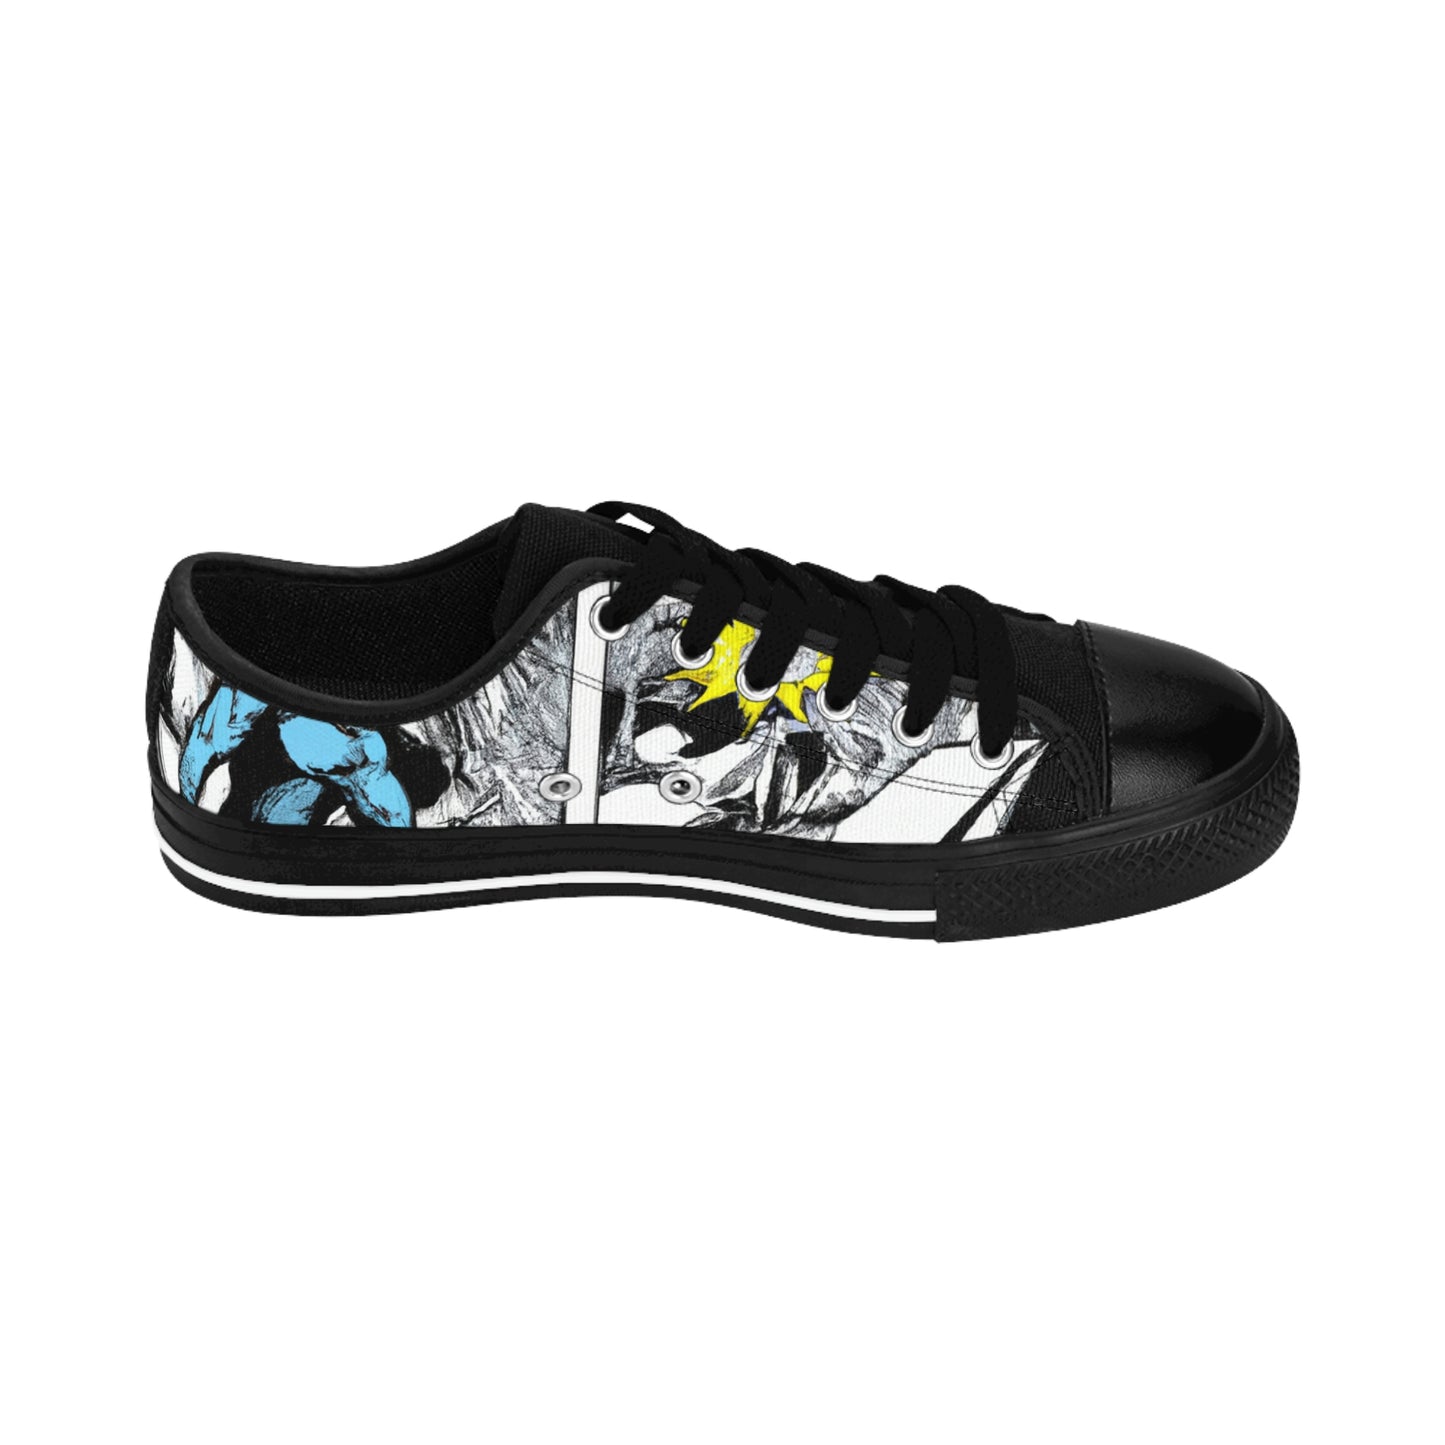 .

Lefricus the Shoemaker - Comic Book Low Top